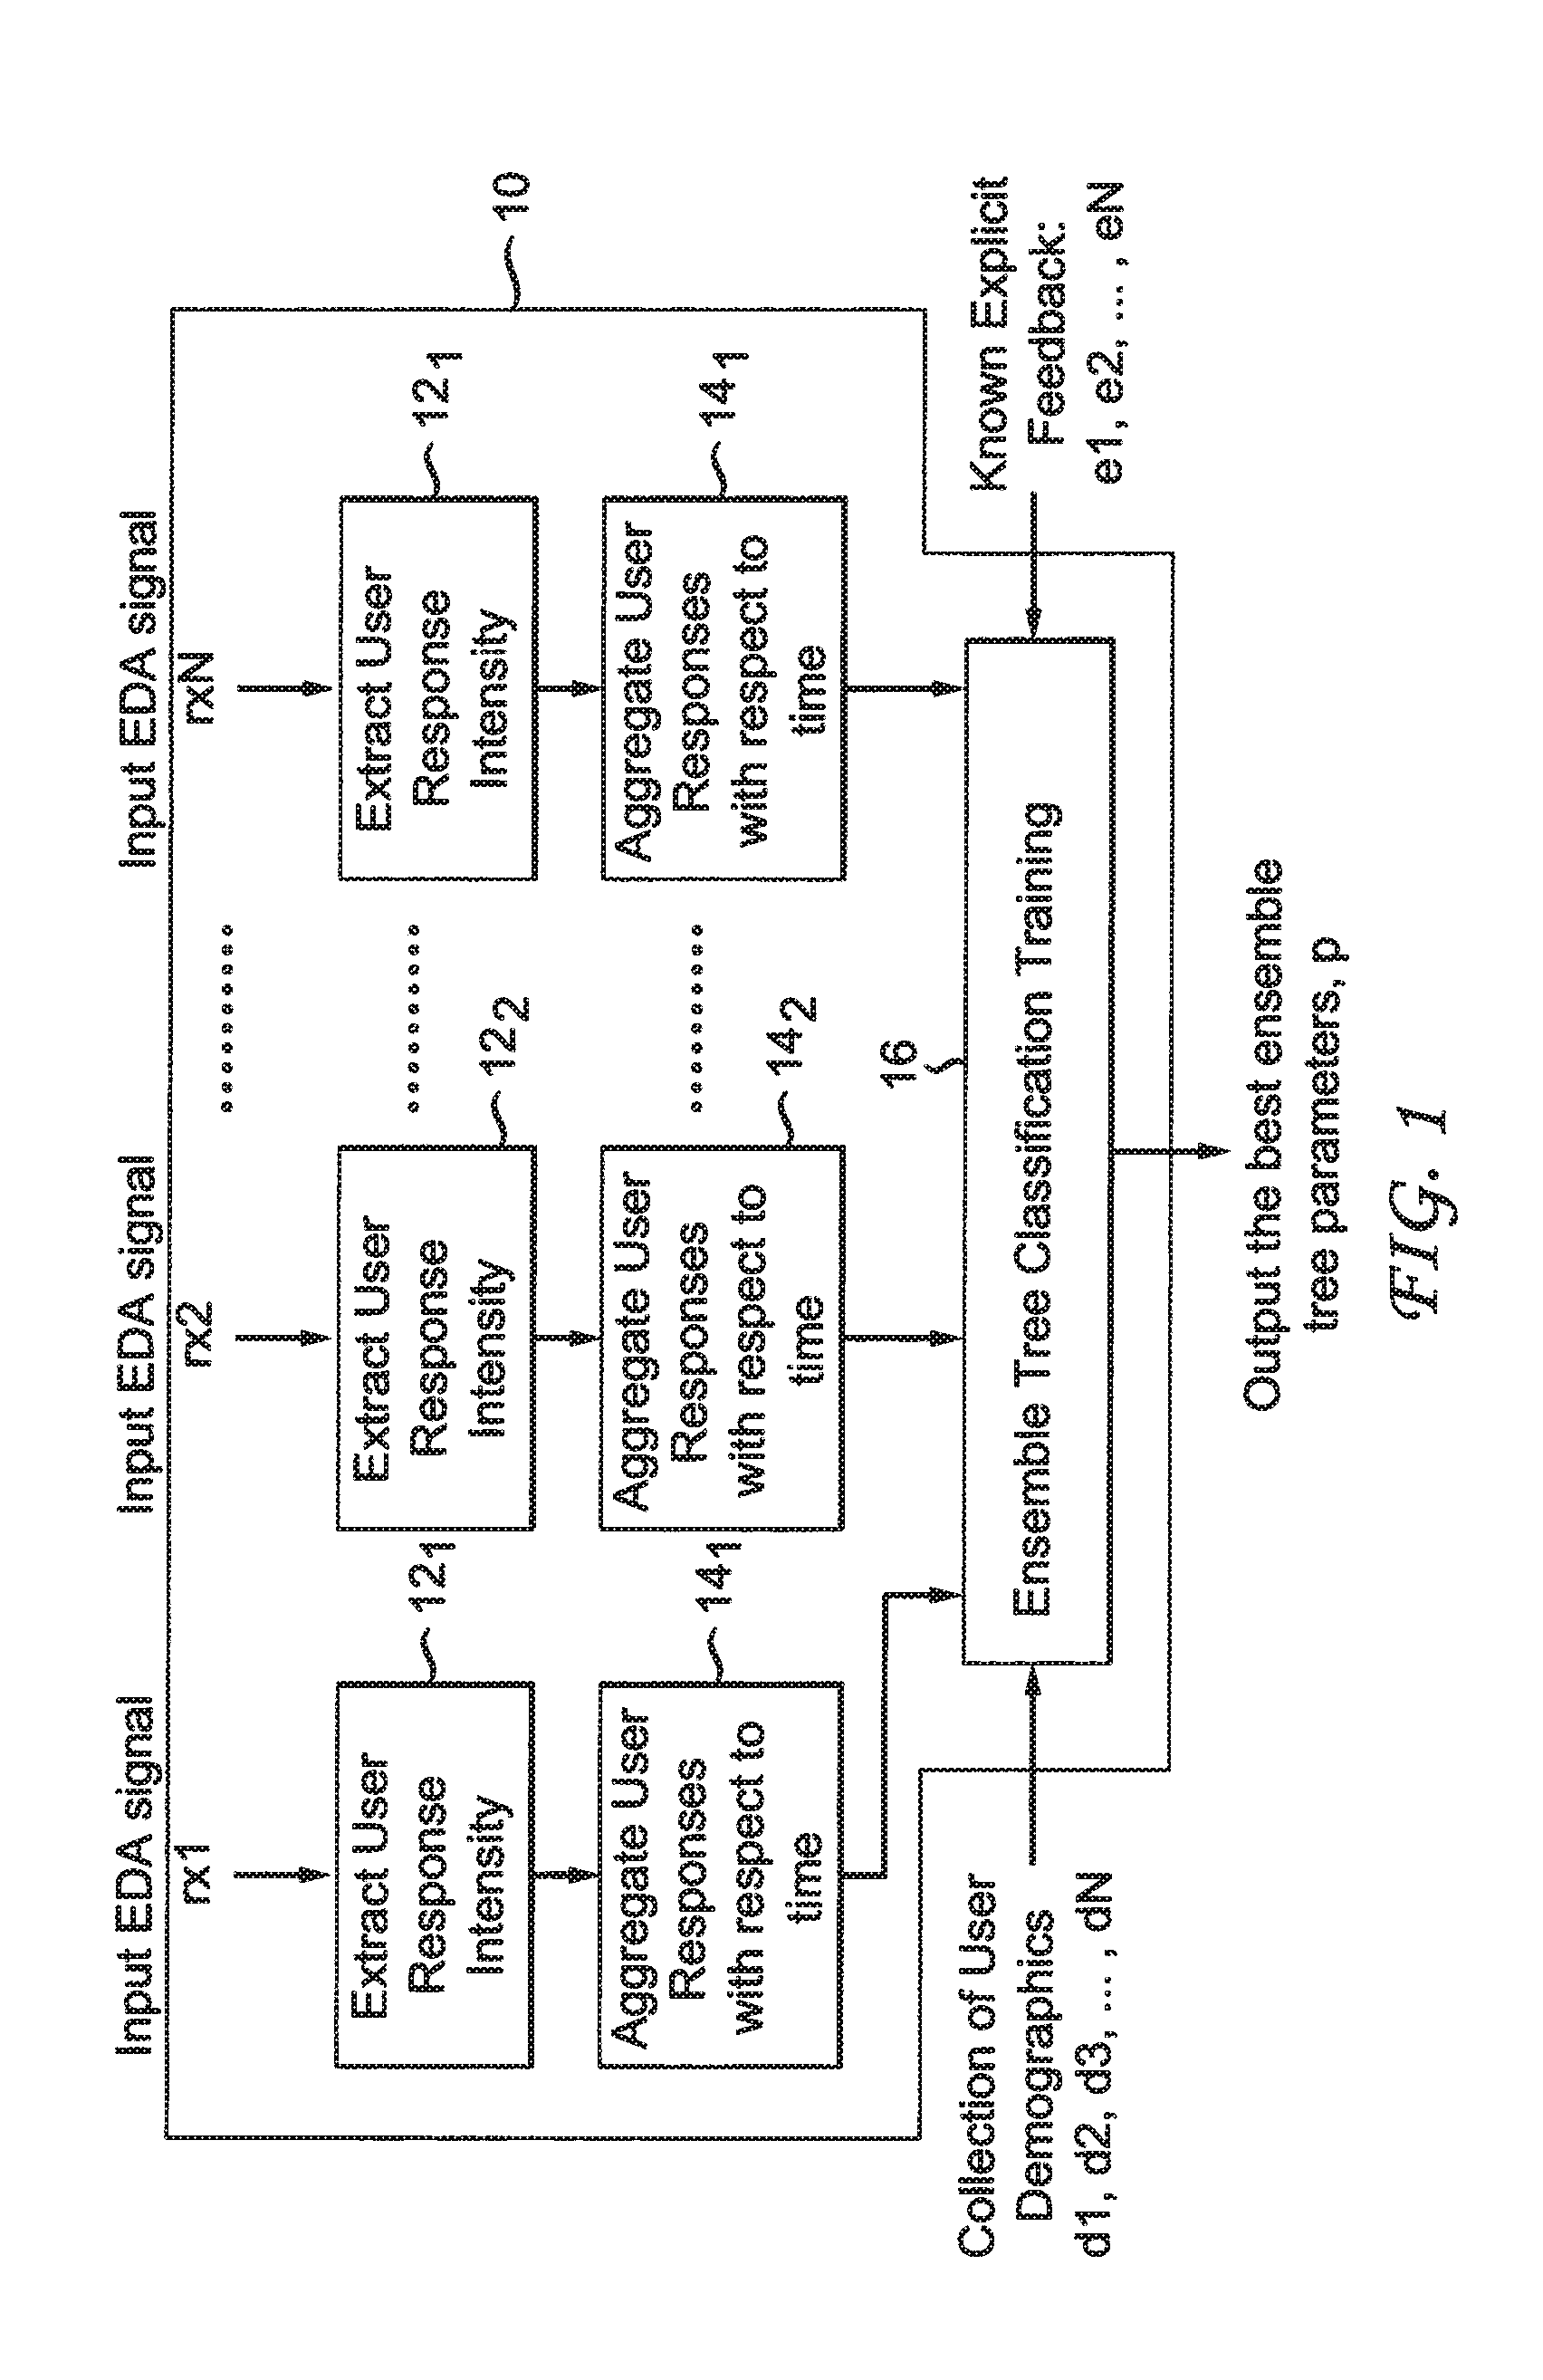 System and method for predicting audience responses to content from electro-dermal activity signals